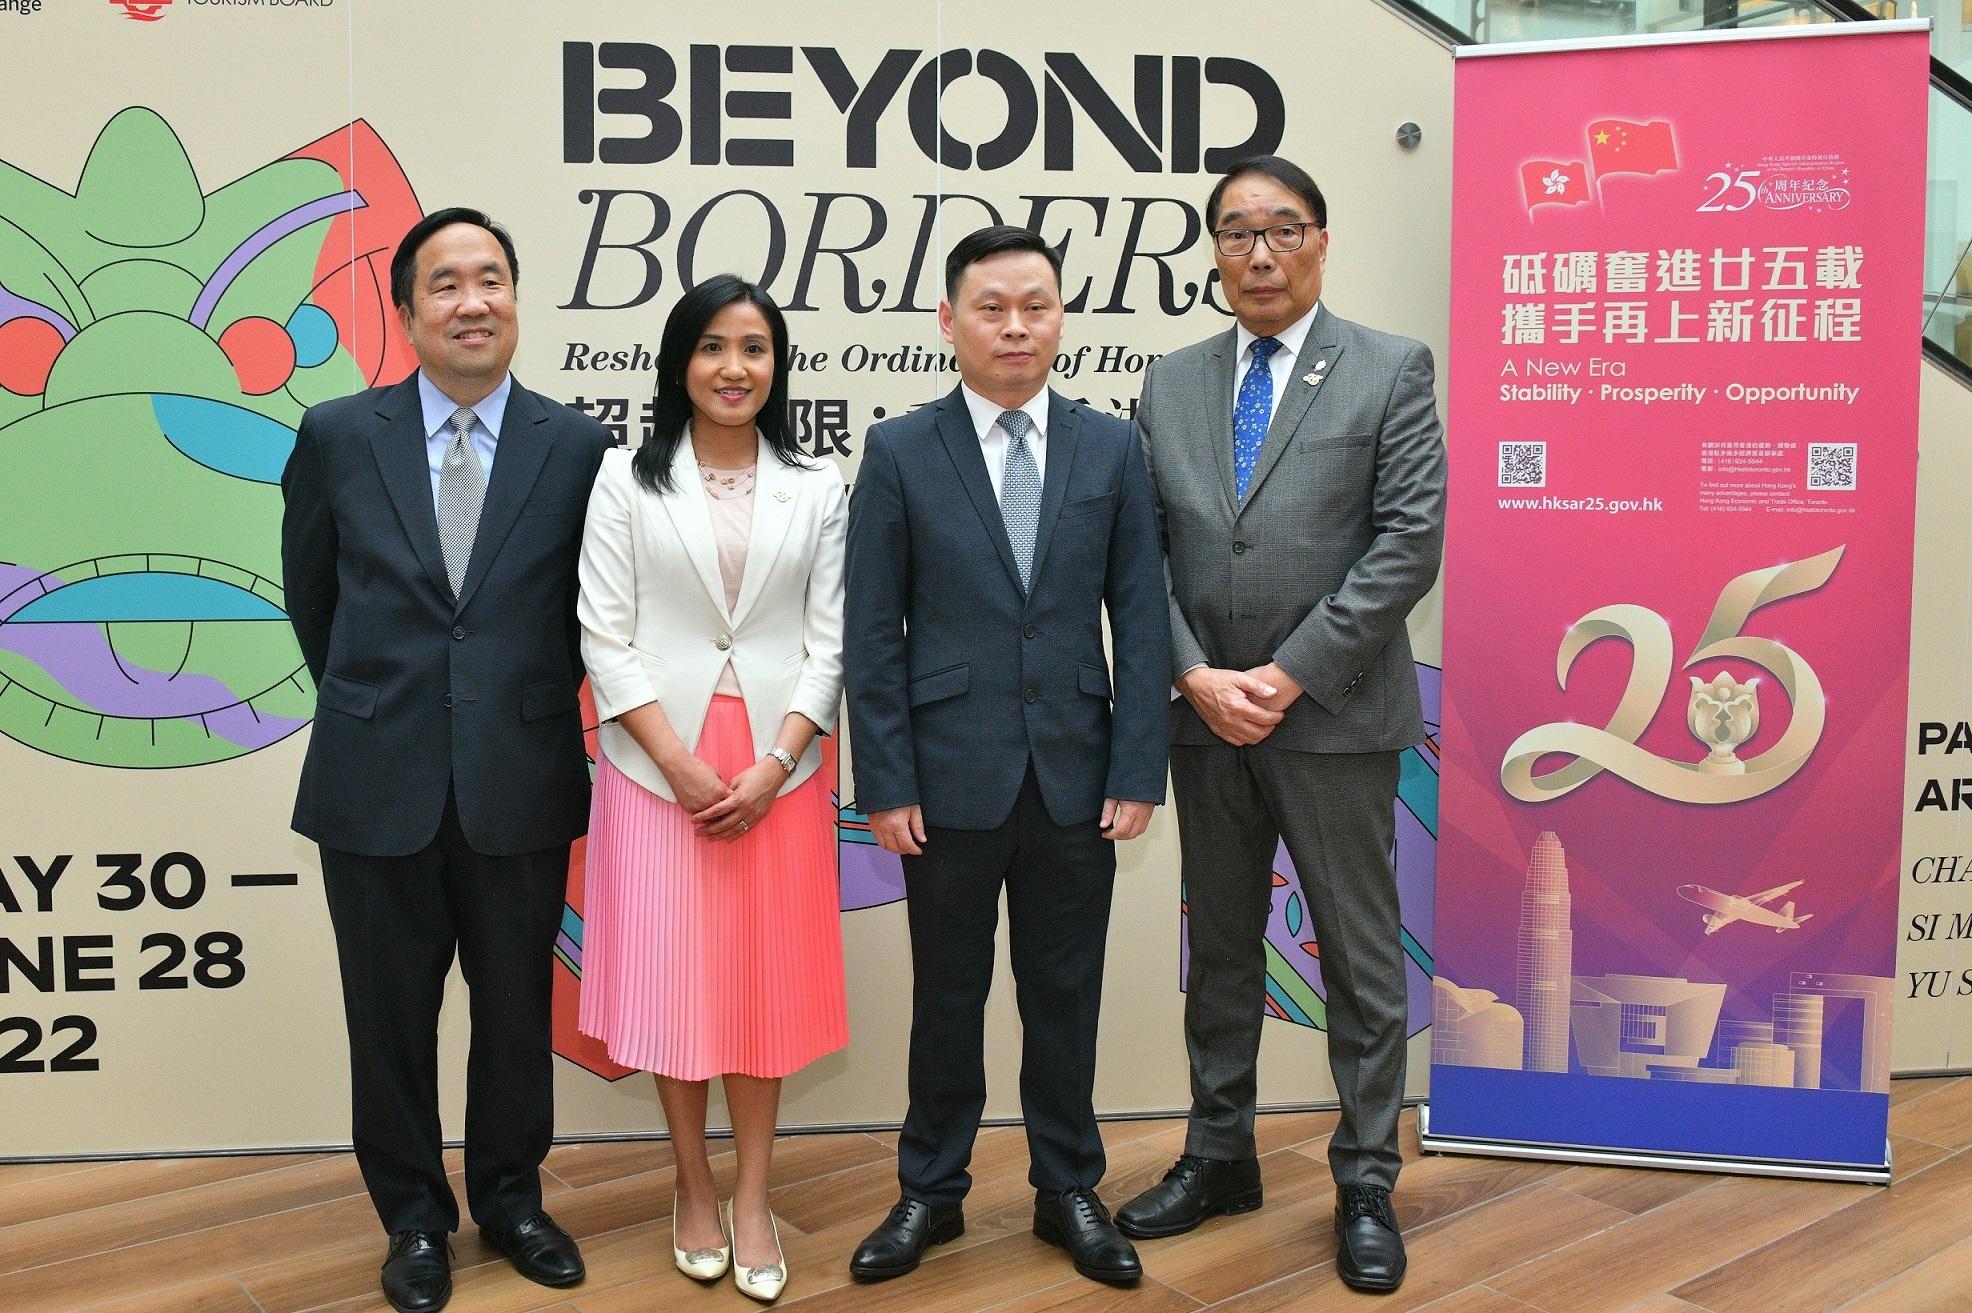 The Director of the Hong Kong Economic and Trade Office (Toronto), Ms Emily Mo (second left), officiates at the opening ceremony of the "Beyond Borders: Reshaping the Ordinaries of Hong Kong" art exhibition yesterday (June 1, Toronto time), and is pictured with Deputy Consul General of the People's Republic of China in Toronto Mr Cheng Hongbo (second right); the Director of Canada, Central and South America of the Hong Kong Tourism Board, Mr Michael Lim (first left); and the Founder of the CanAsia Creative Exchange, Mr Stephen Siu (first right).
